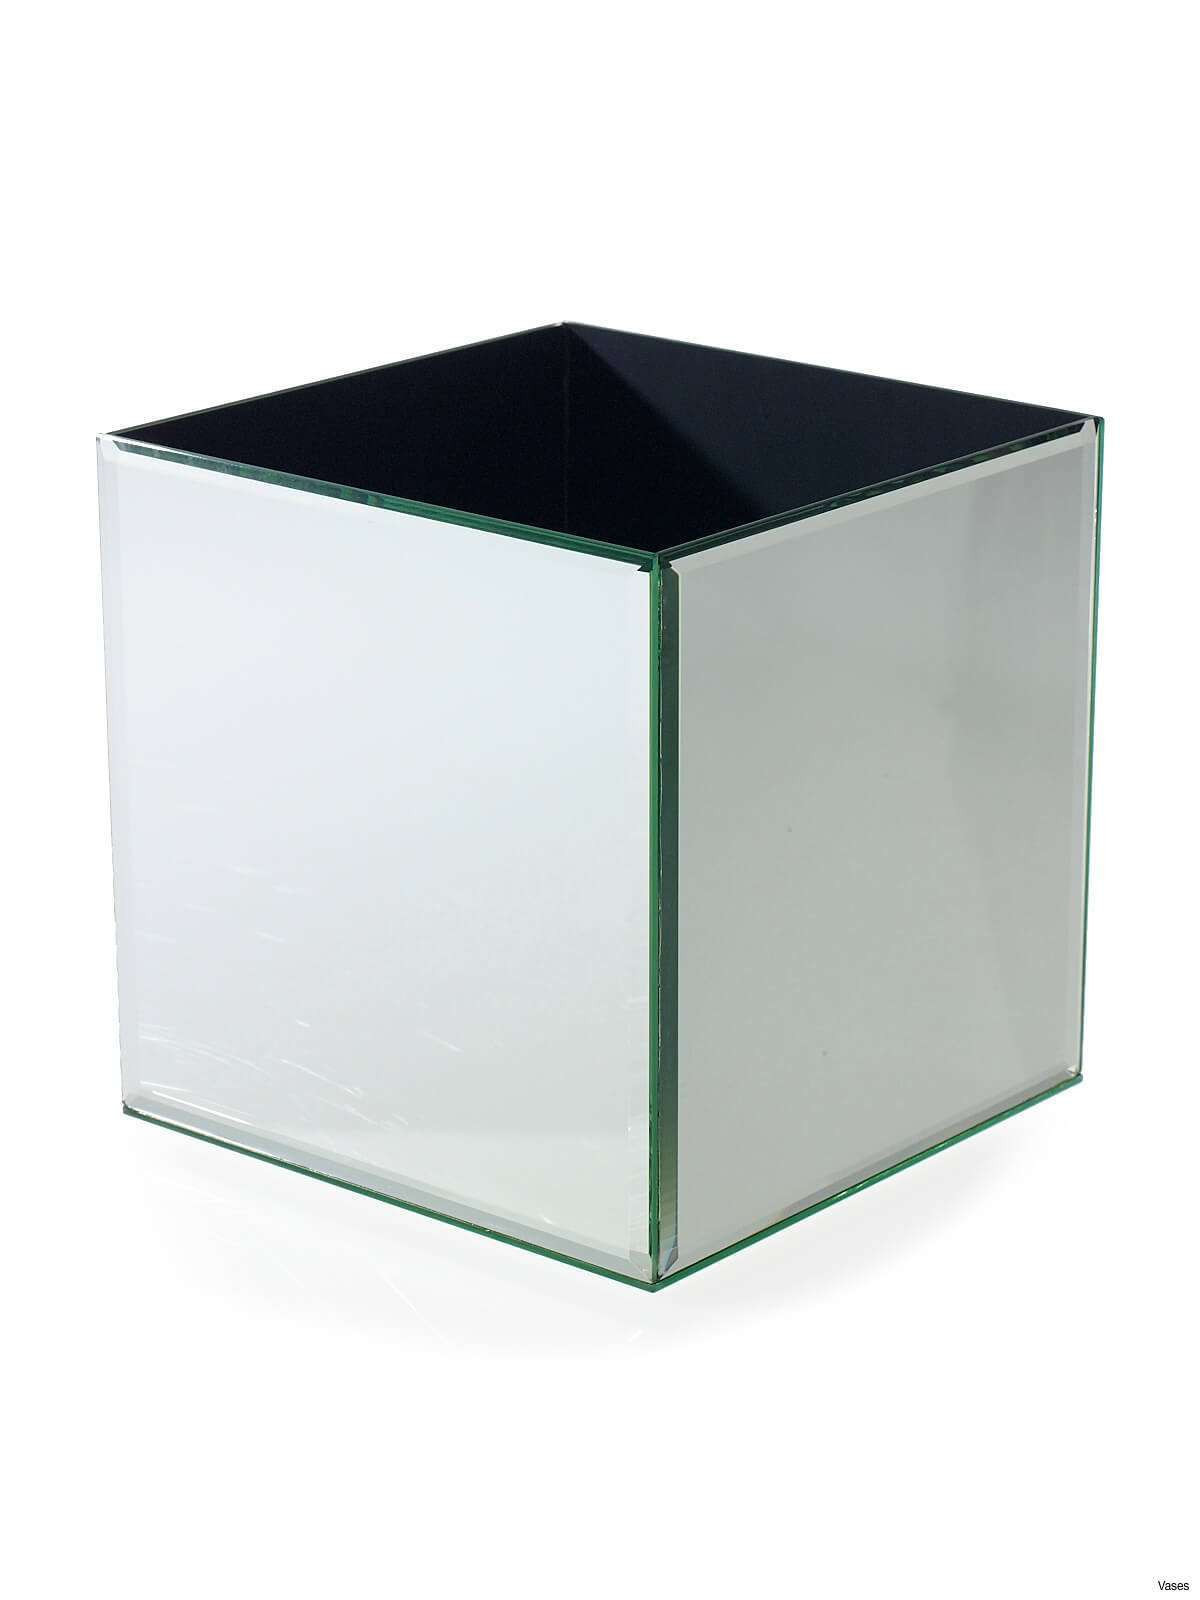 13 Amazing Black Ceramic Cube Vase 2024 free download black ceramic cube vase of black square vase pics black square coffee table home design with black square vase pics black square coffee table home design planning remarkable of black square 